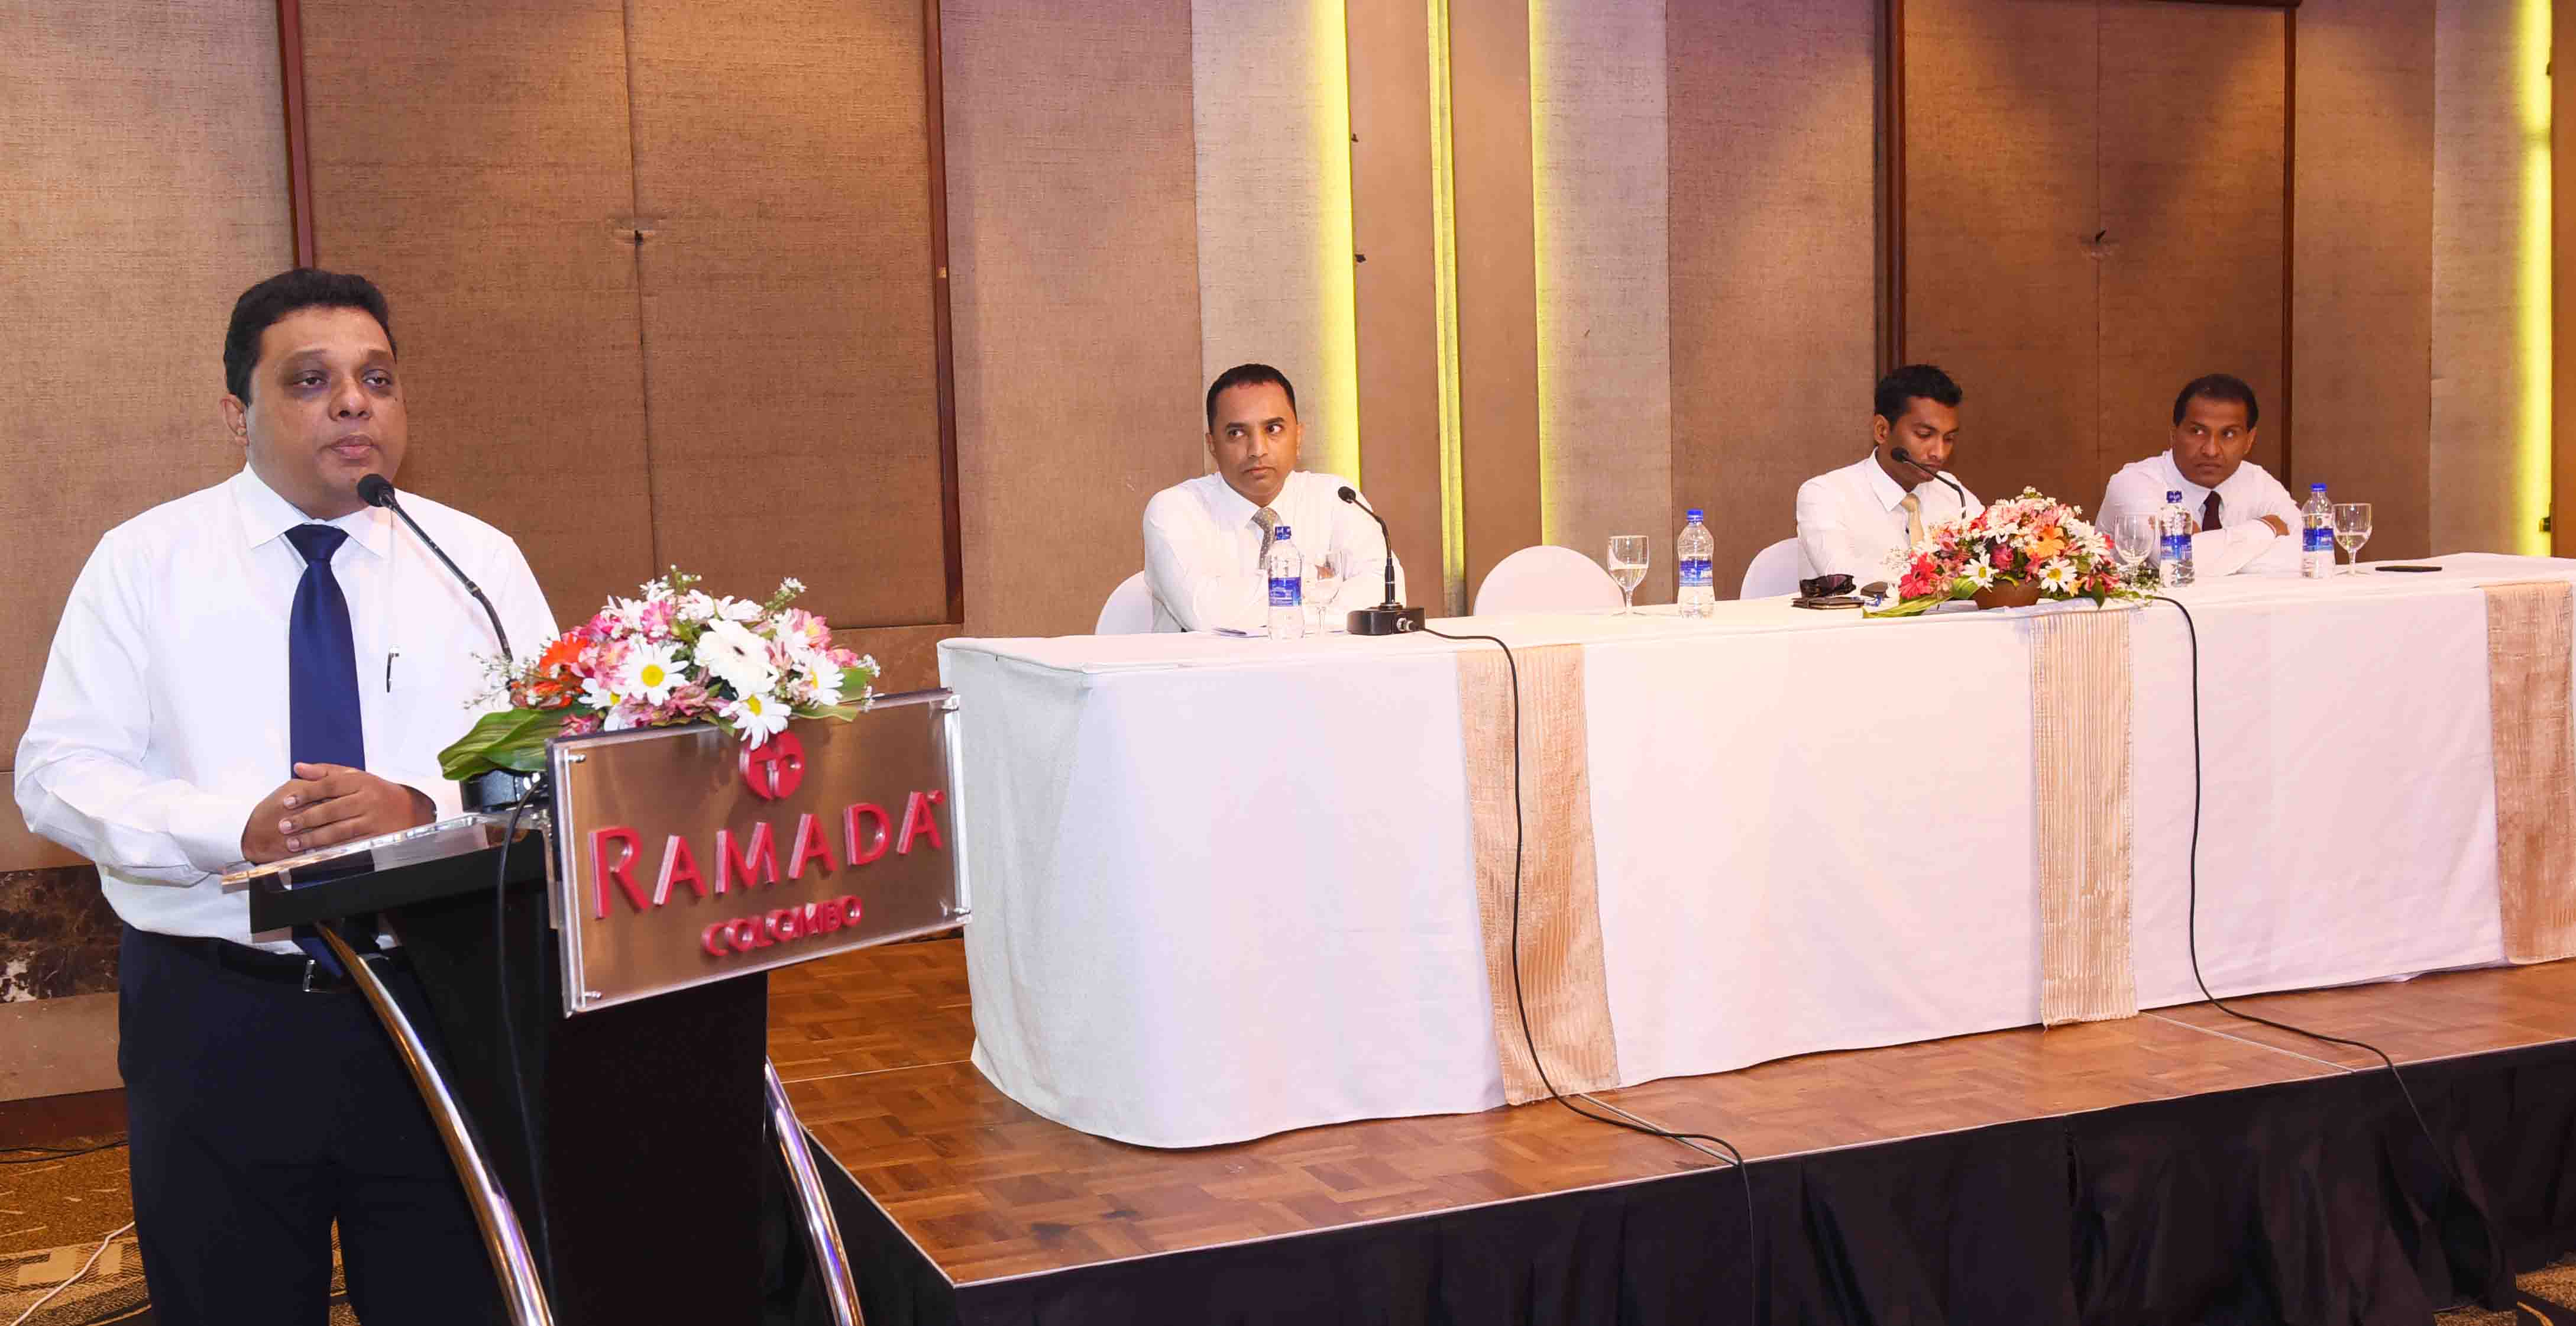 SriLankan Airlines Sales Manager Sri Lanka and Maldives Jayantha Abeysinghe addressing the gathering whilst officials of the SriLankan Sales Team looks on.